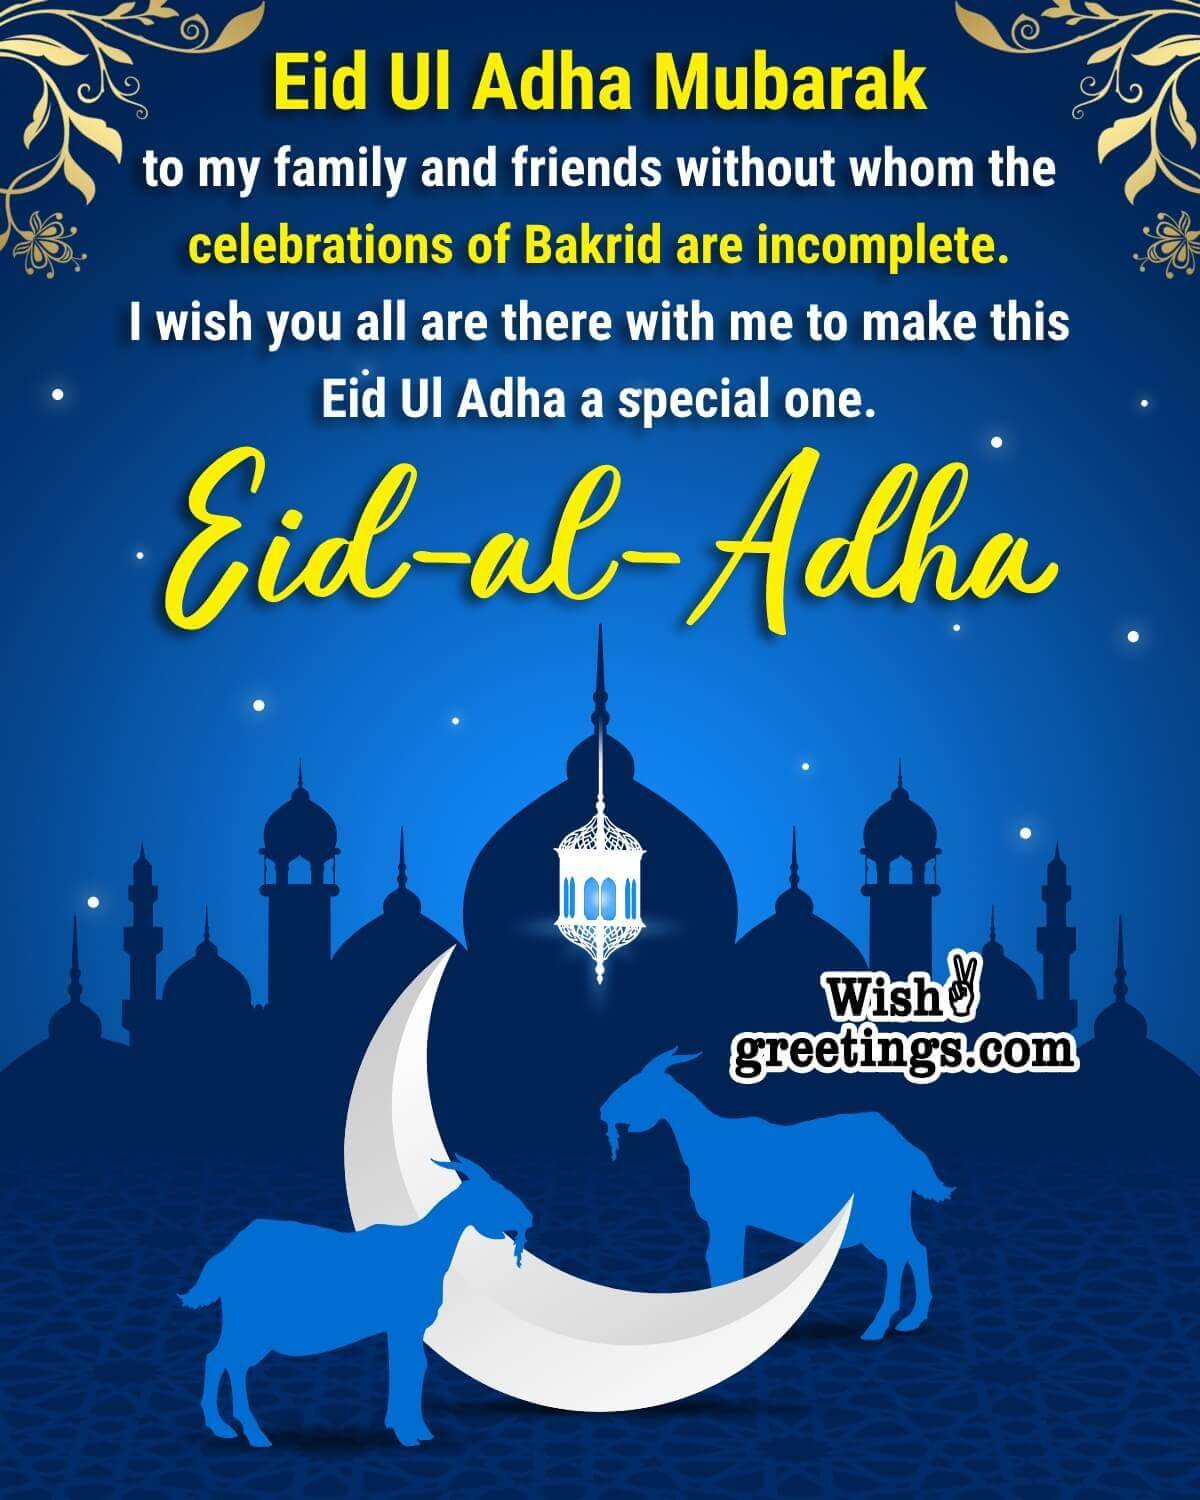 Eid Al Adha Wishing Image For Friend And Family